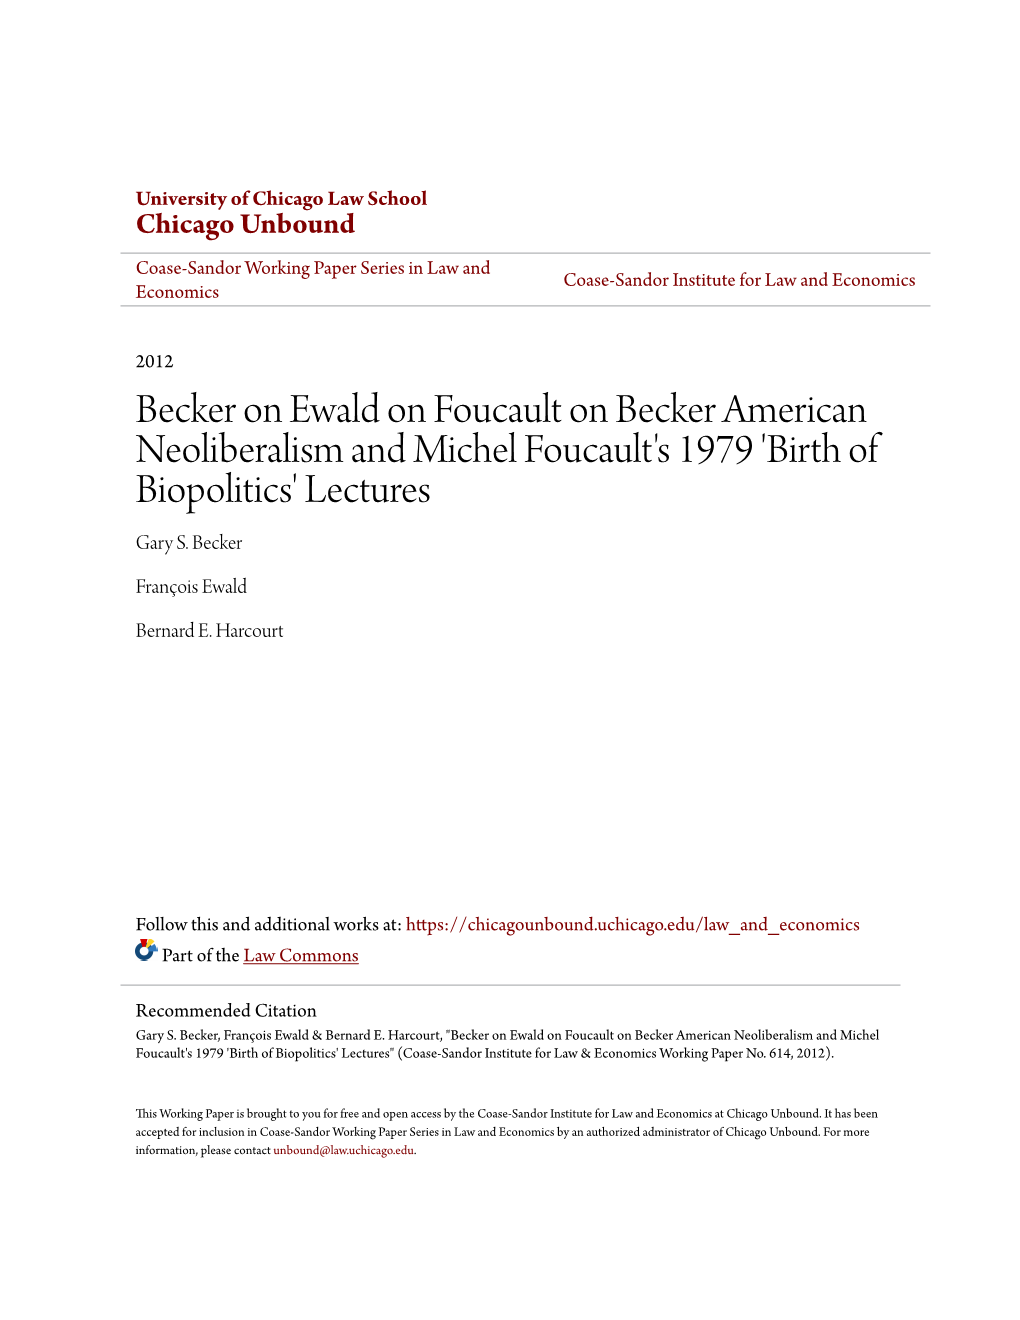 Becker on Ewald on Foucault on Becker American Neoliberalism and Michel Foucault's 1979 'Birth of Biopolitics' Lectures Gary S